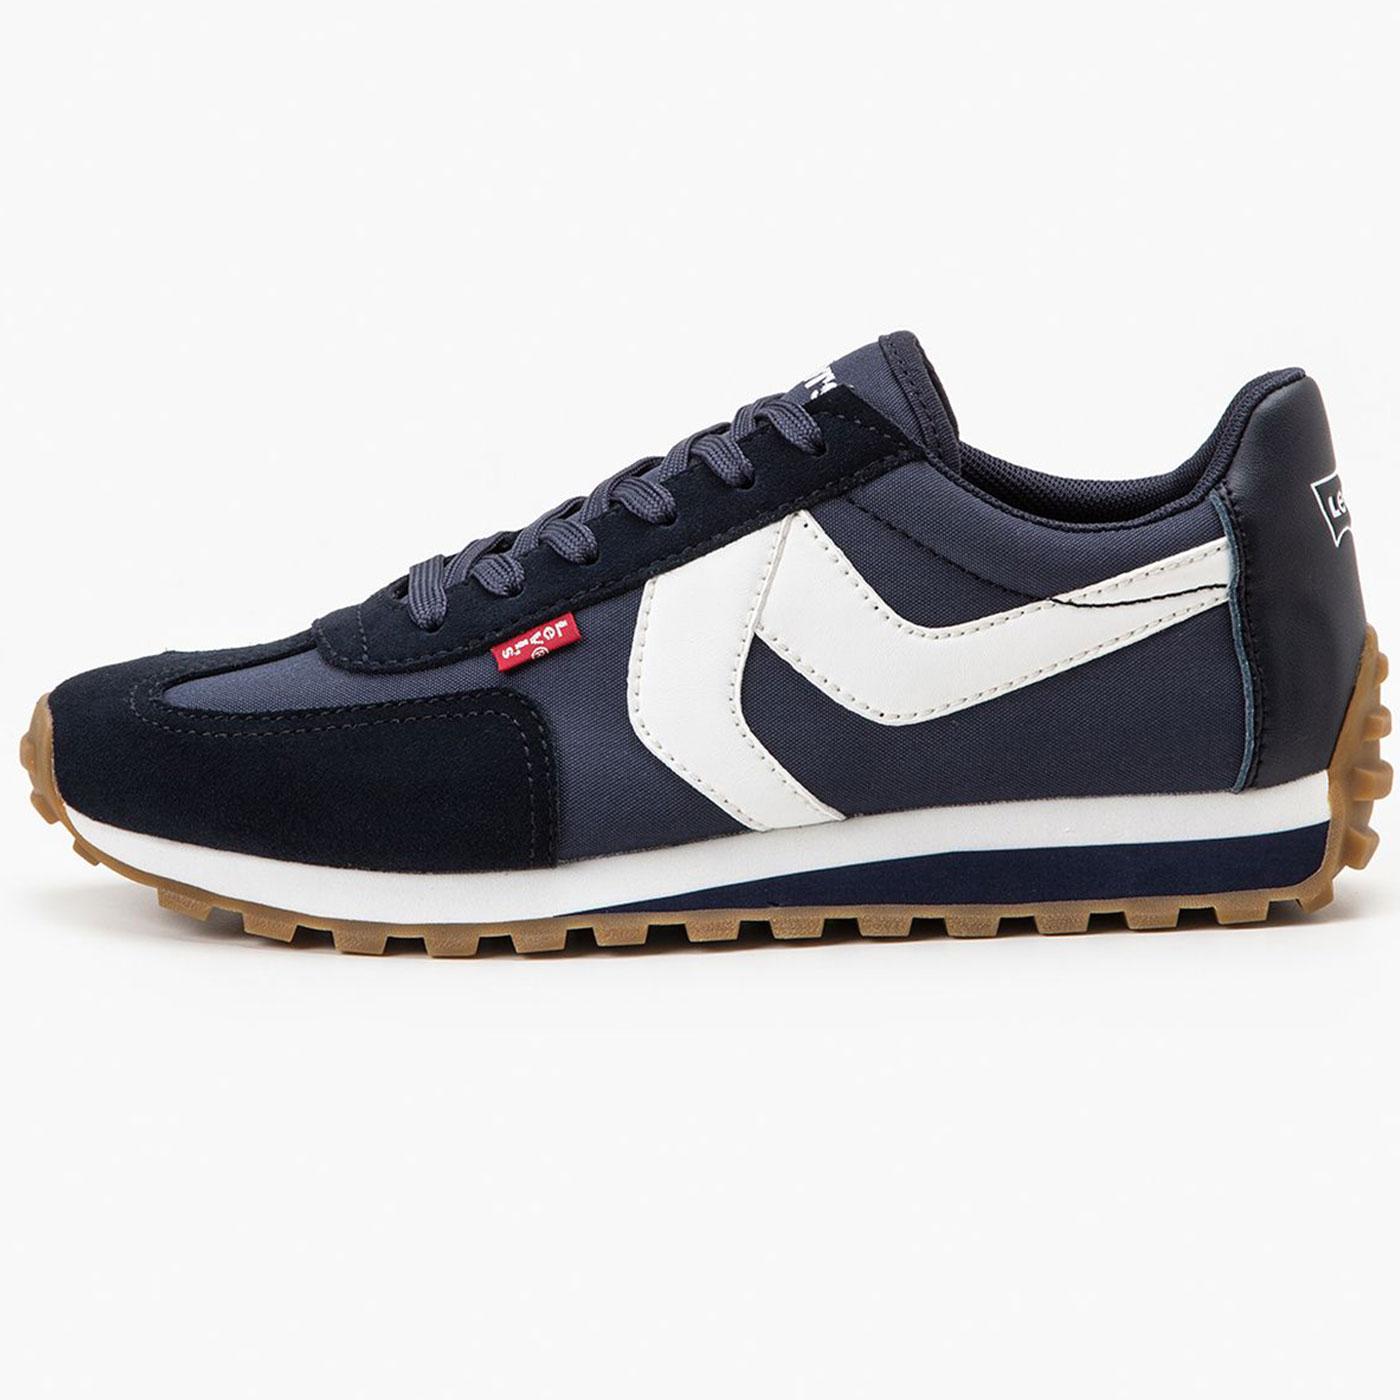 Levi's® Stryder Red Tab™ Retro Trainers Navy Blue